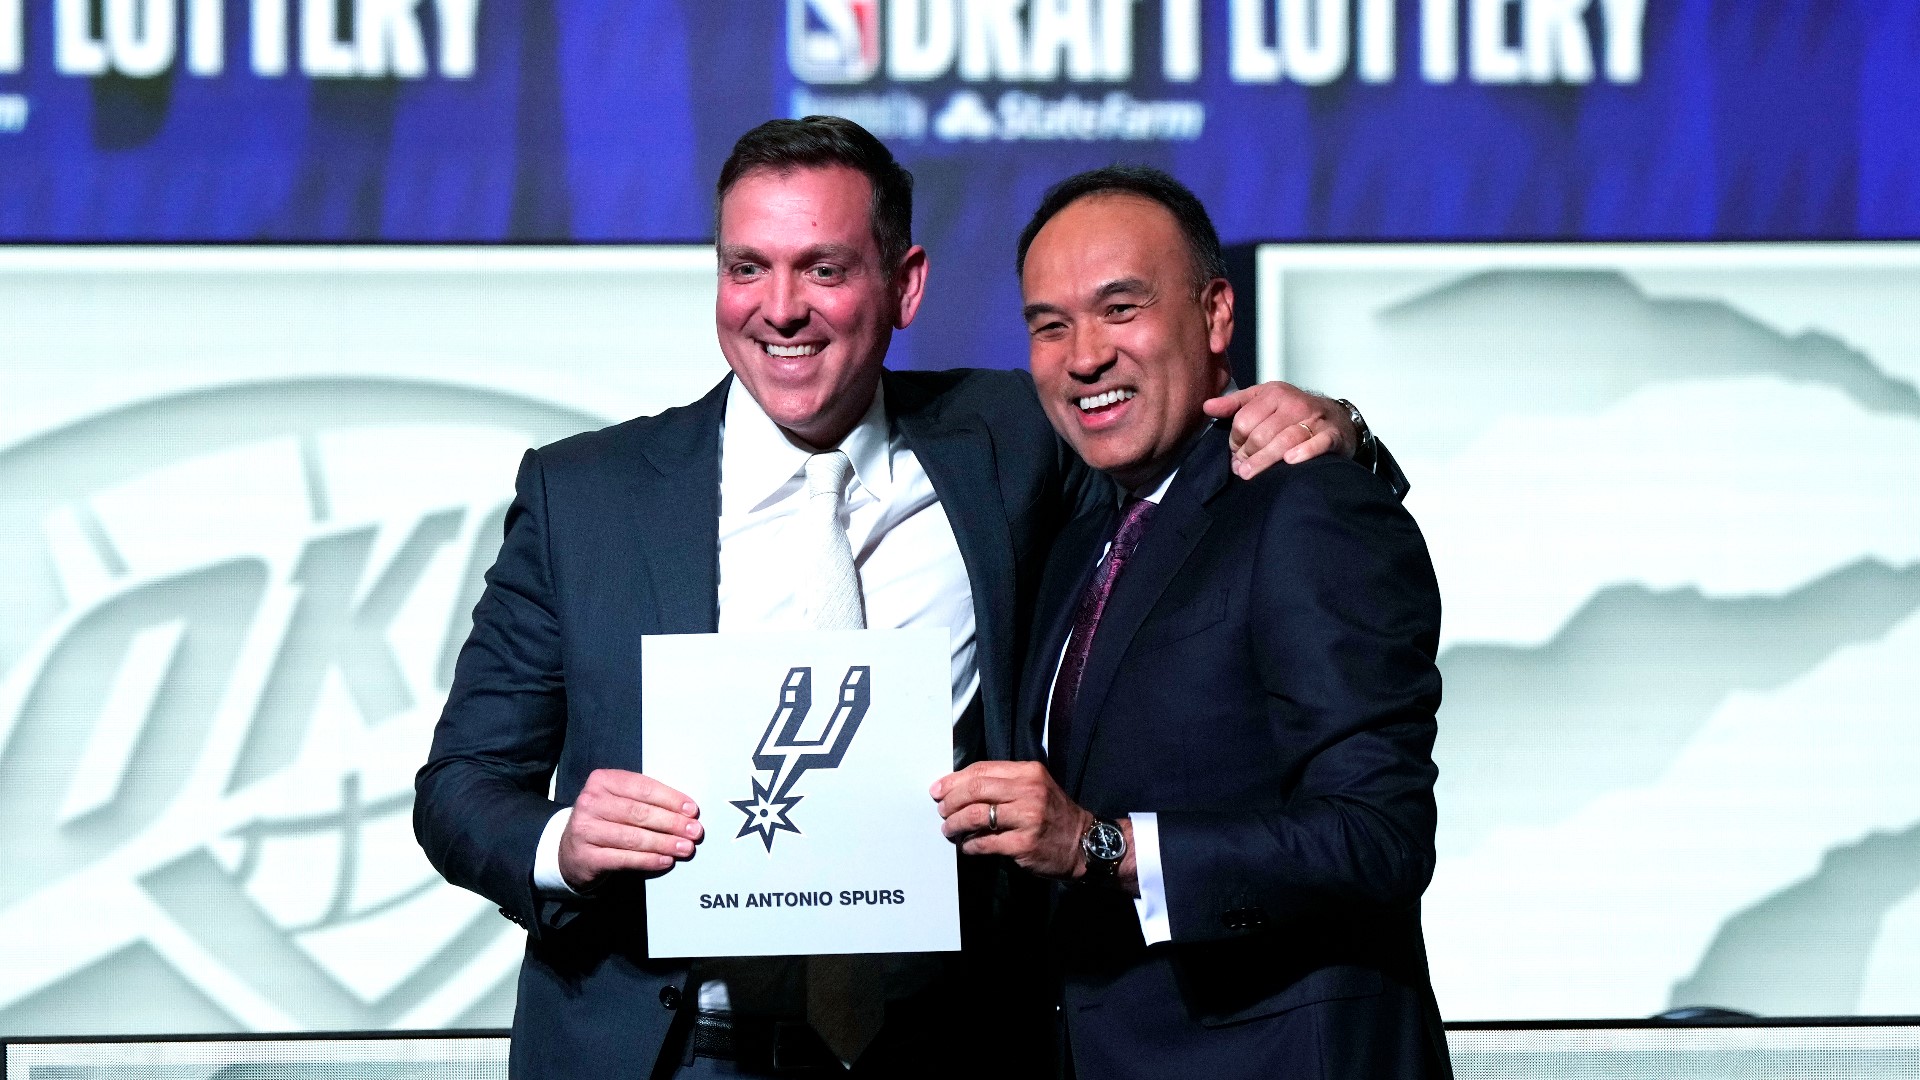 Spurs Nation: Major Moments in San Antonio Basketball by Staff of Expr